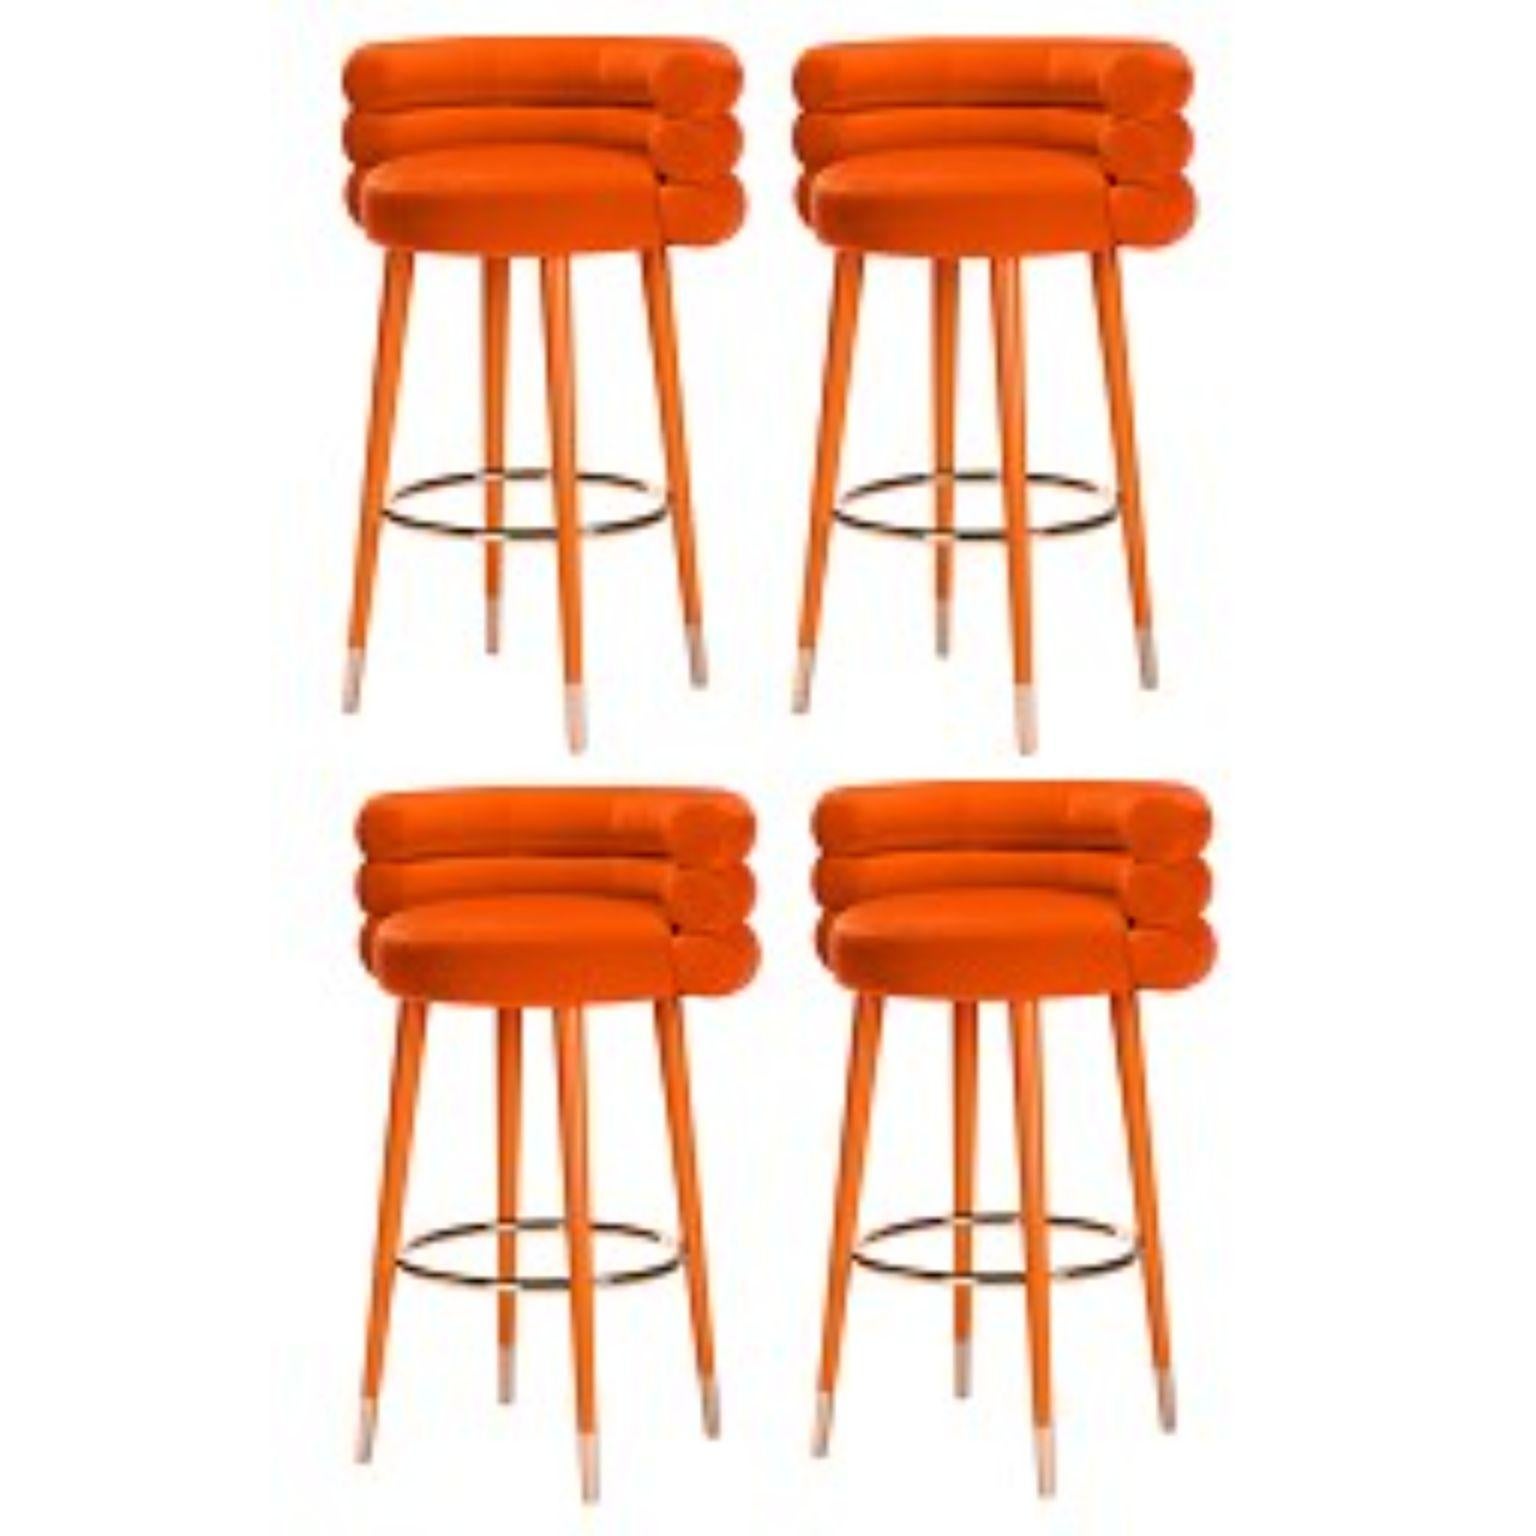 Set of 4 marshmallow bar stools, Royal Stranger
Dimensions: 100 x 70 x 60 cm
Materials: velvet upholstery, brass
Available in: mint green, light pink, royal green, royal red

Royal stranger is an exclusive furniture brand determined to bring